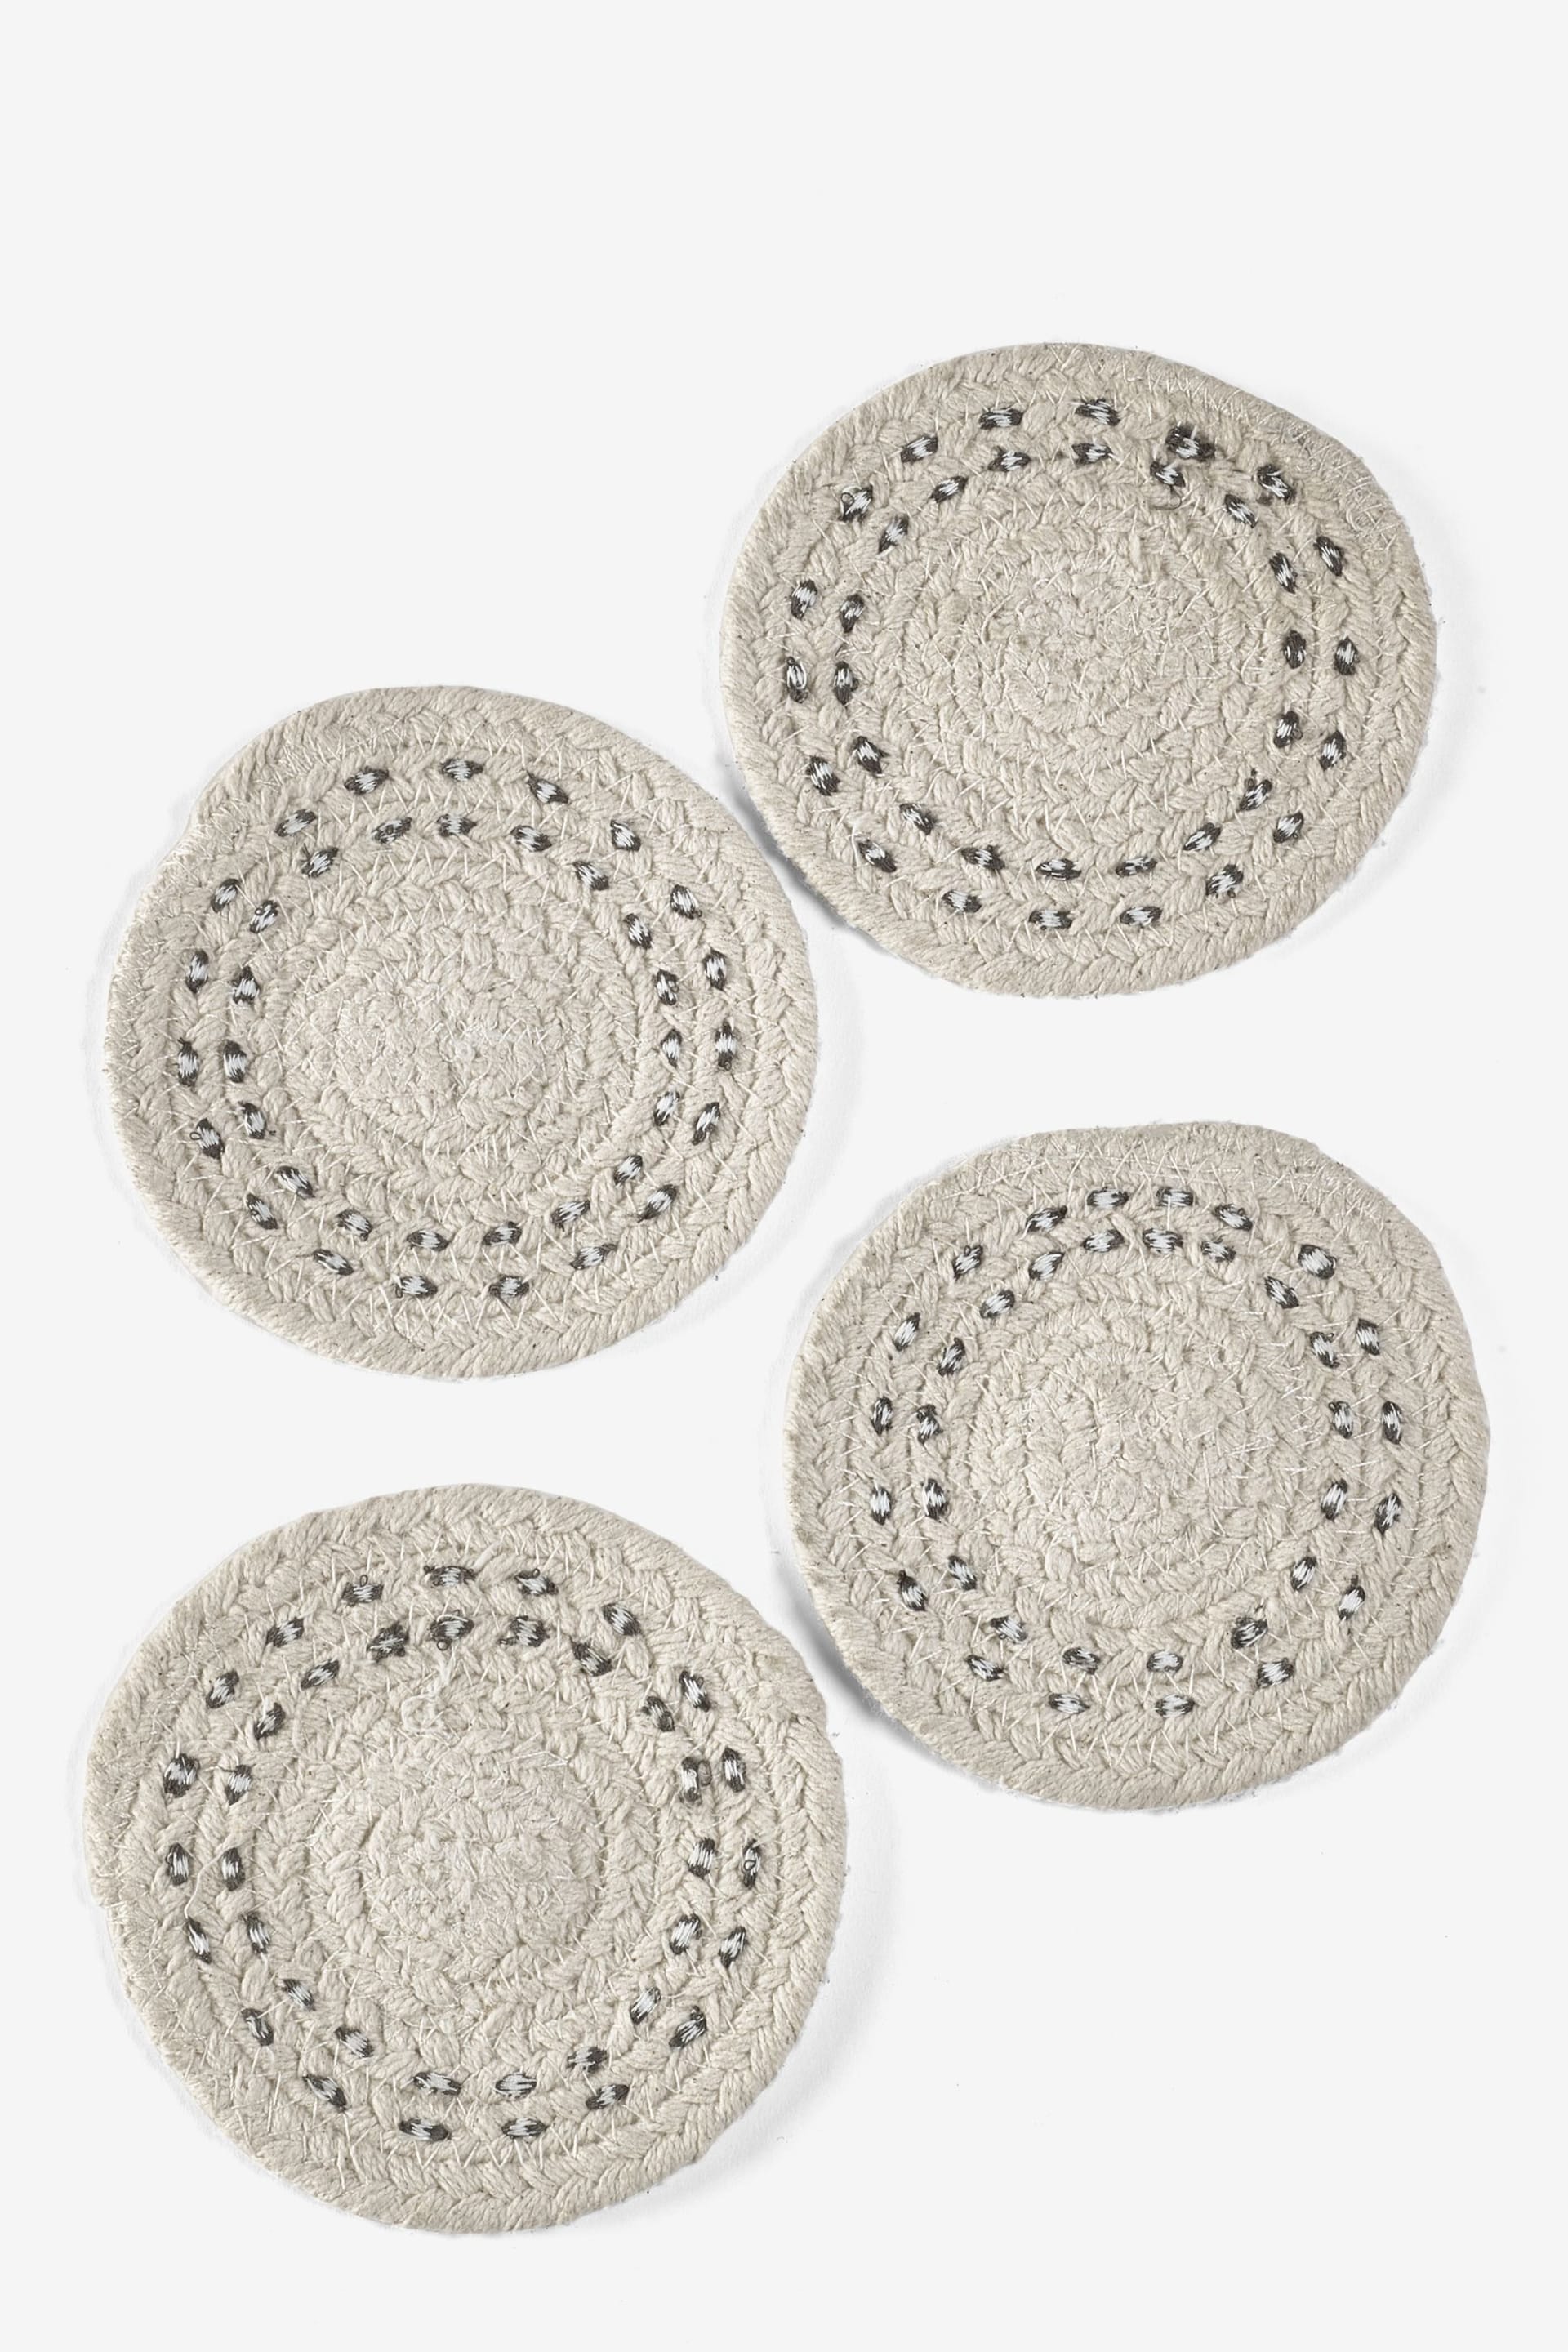 Set of 4 Natural Global Woven Fabric Coasters - Image 3 of 3